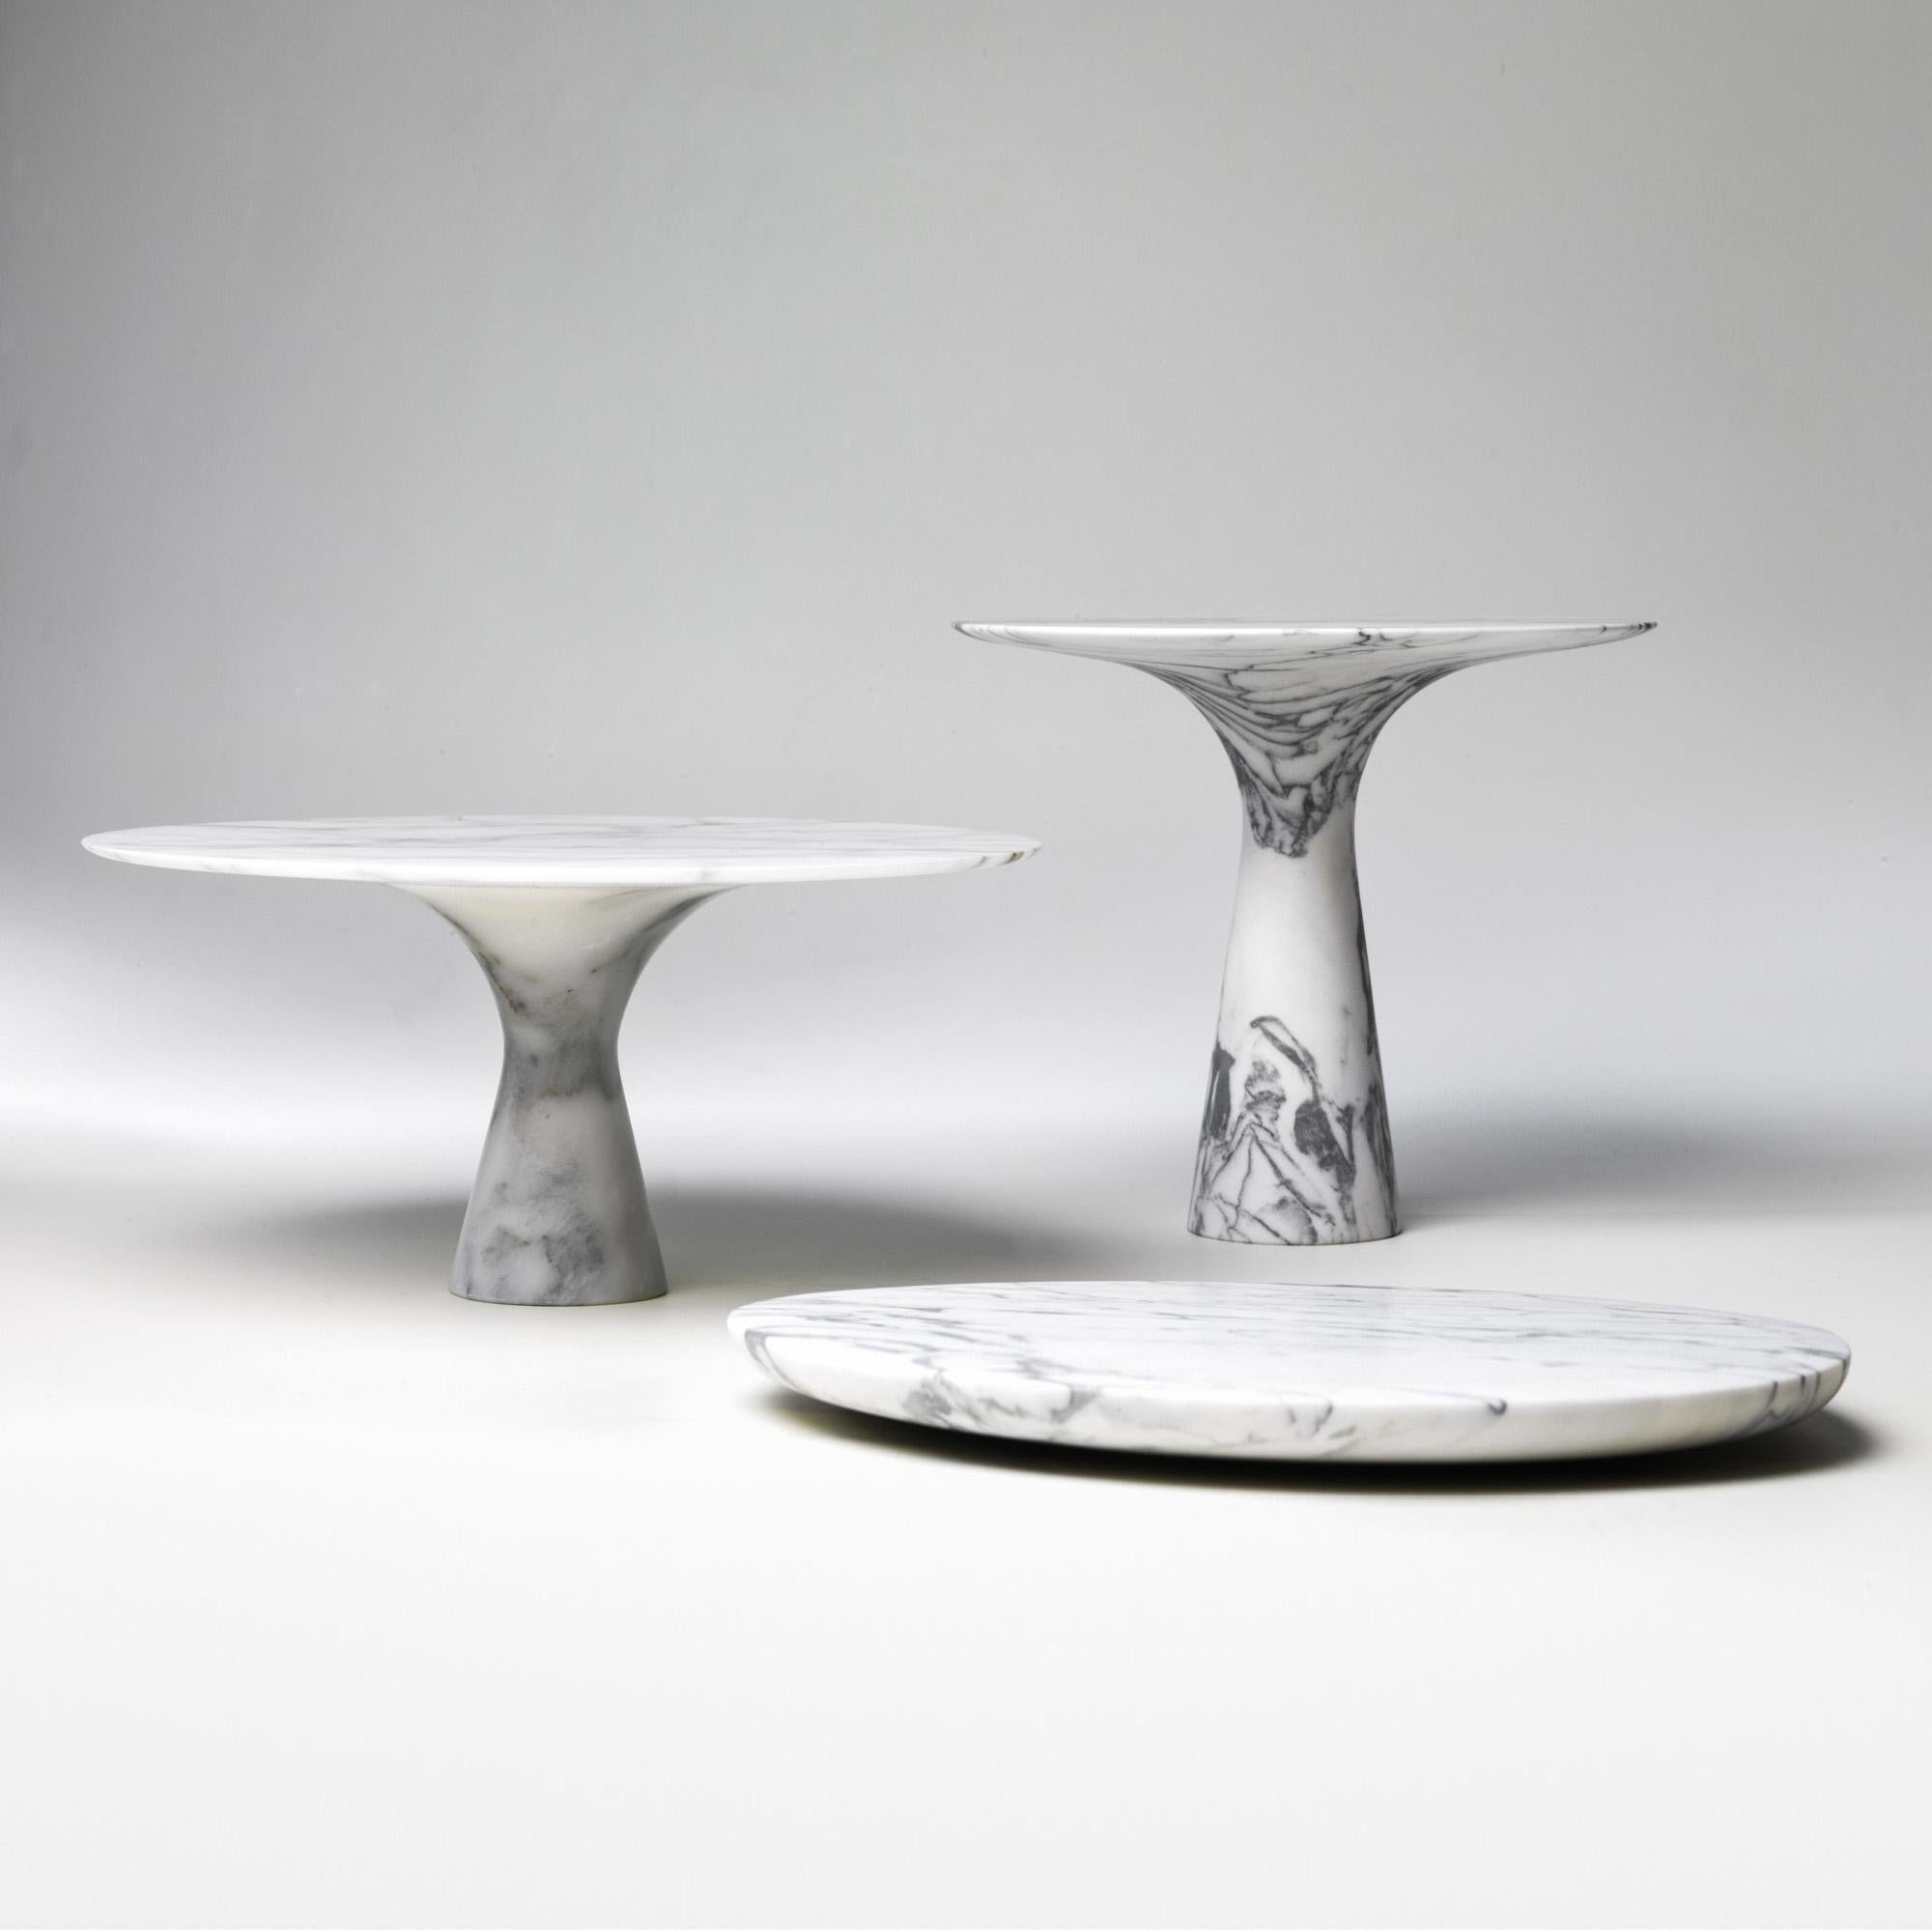 Polished Set of 3 Refined Contemporary Marble Travertino Silver Cake Stands and Plate